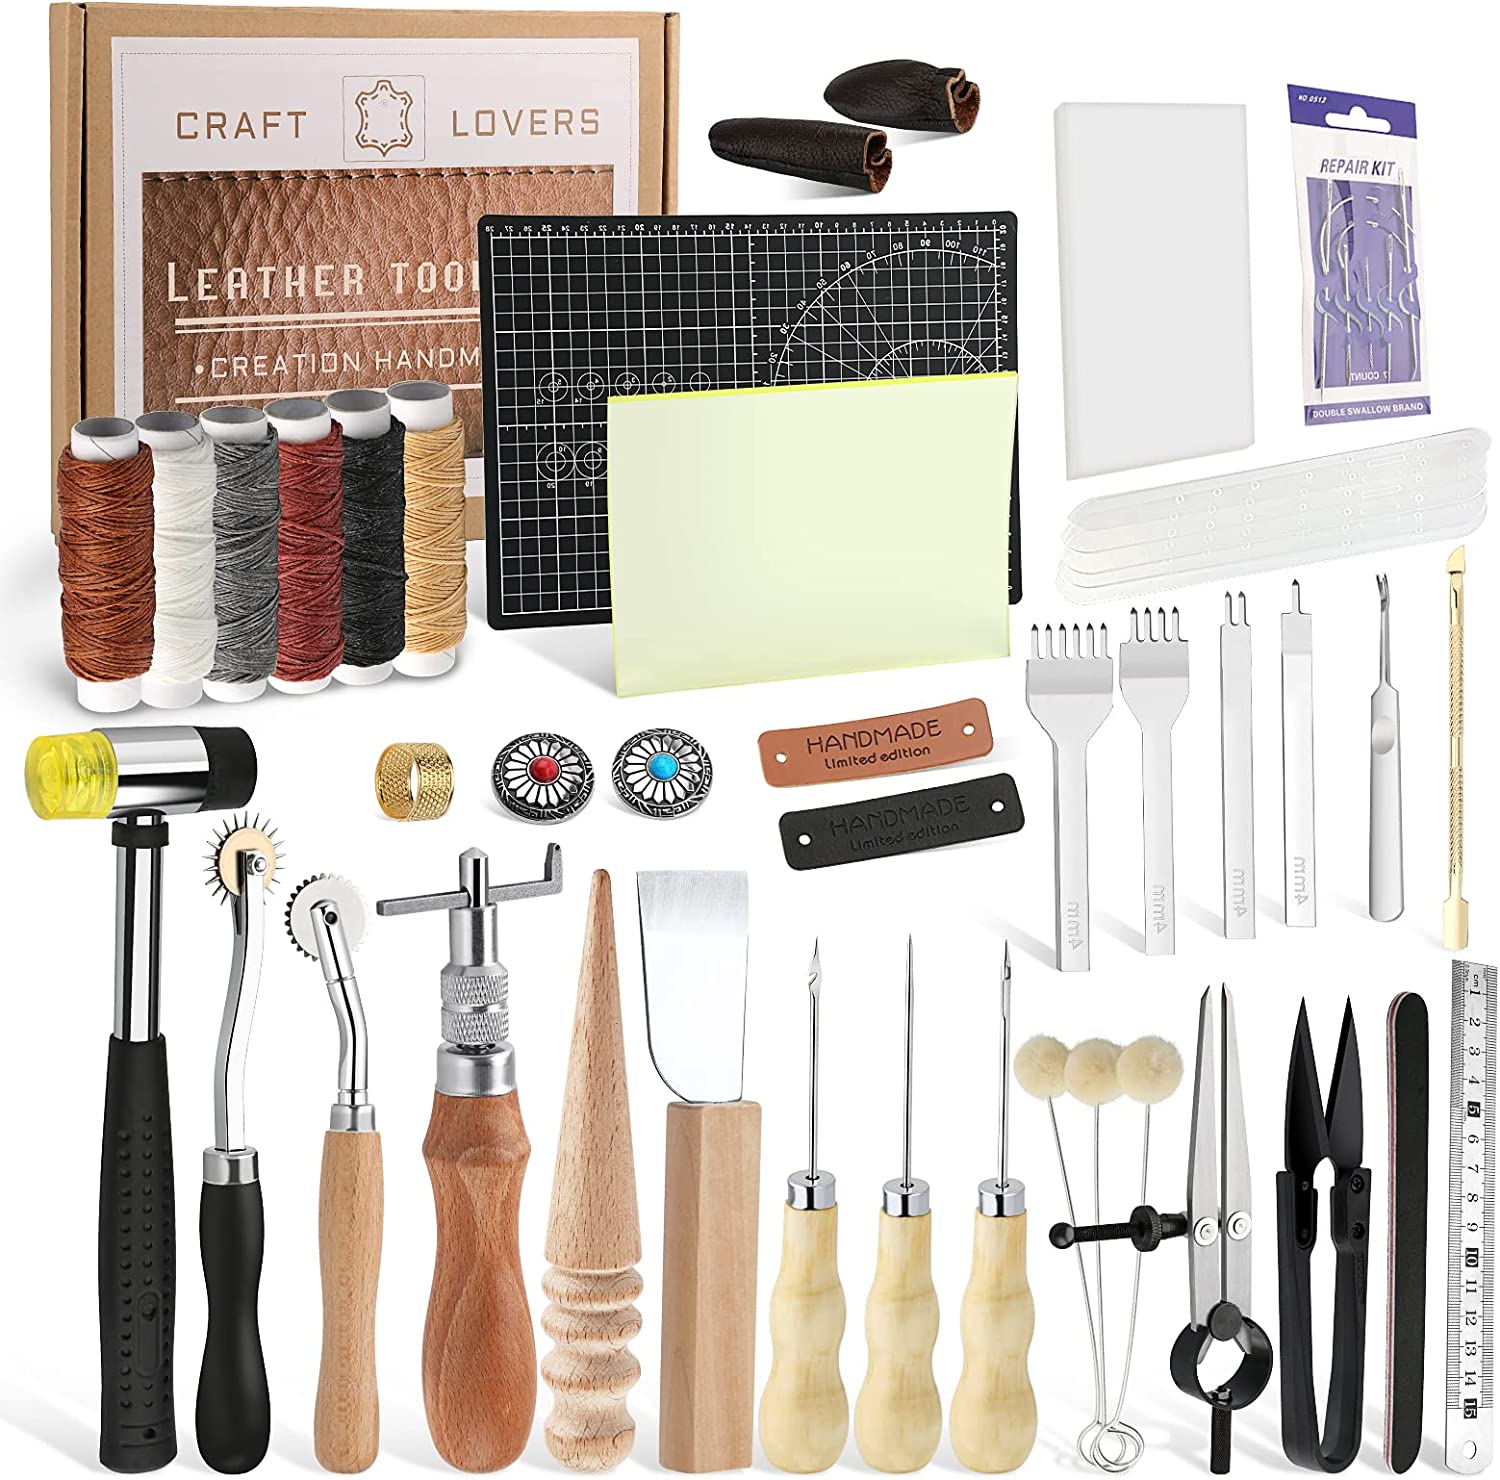 Leather Tooling Kit 33 Pieces Hand Sewing Craft Tools Include Sewing Needles Drilling Awl for DIY Leather Craft Waxed Thread 